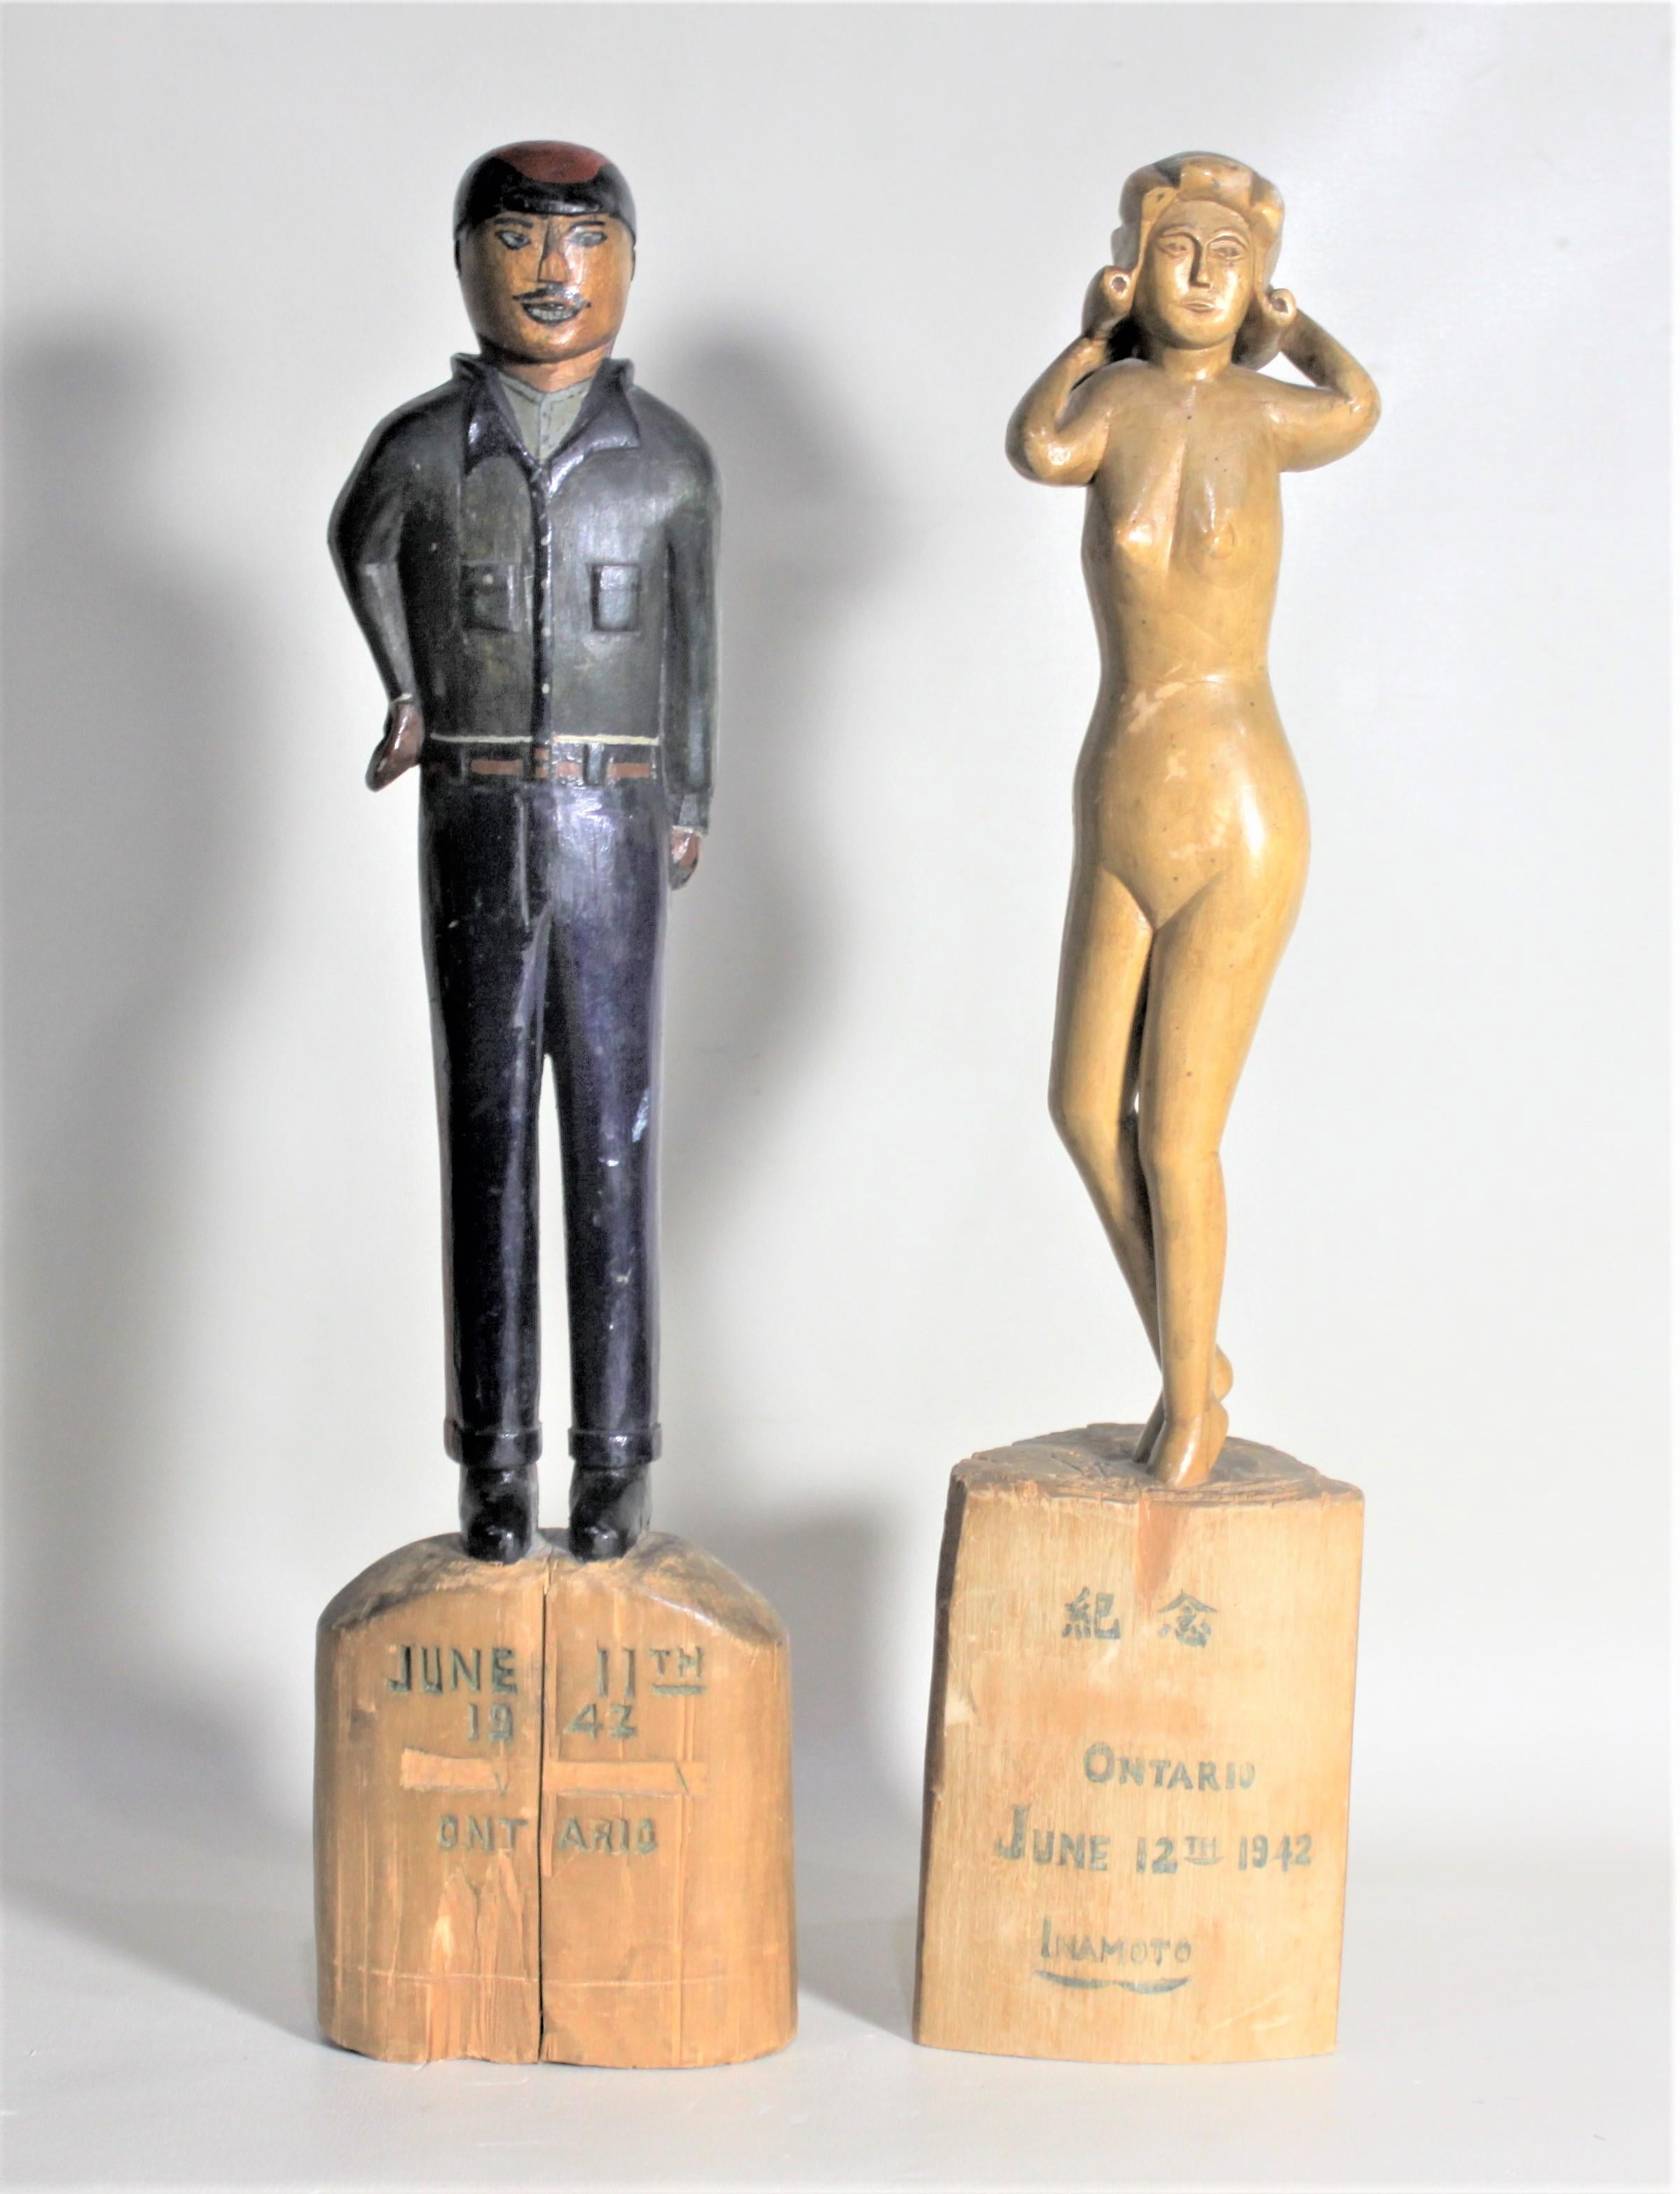 This pair of Folk Art carved figures is believed to have been made by a Japanese immigrant to Canada either while or after being interned by the Canadian government during the Second World War. The male carved figure is hand painted in vibrant